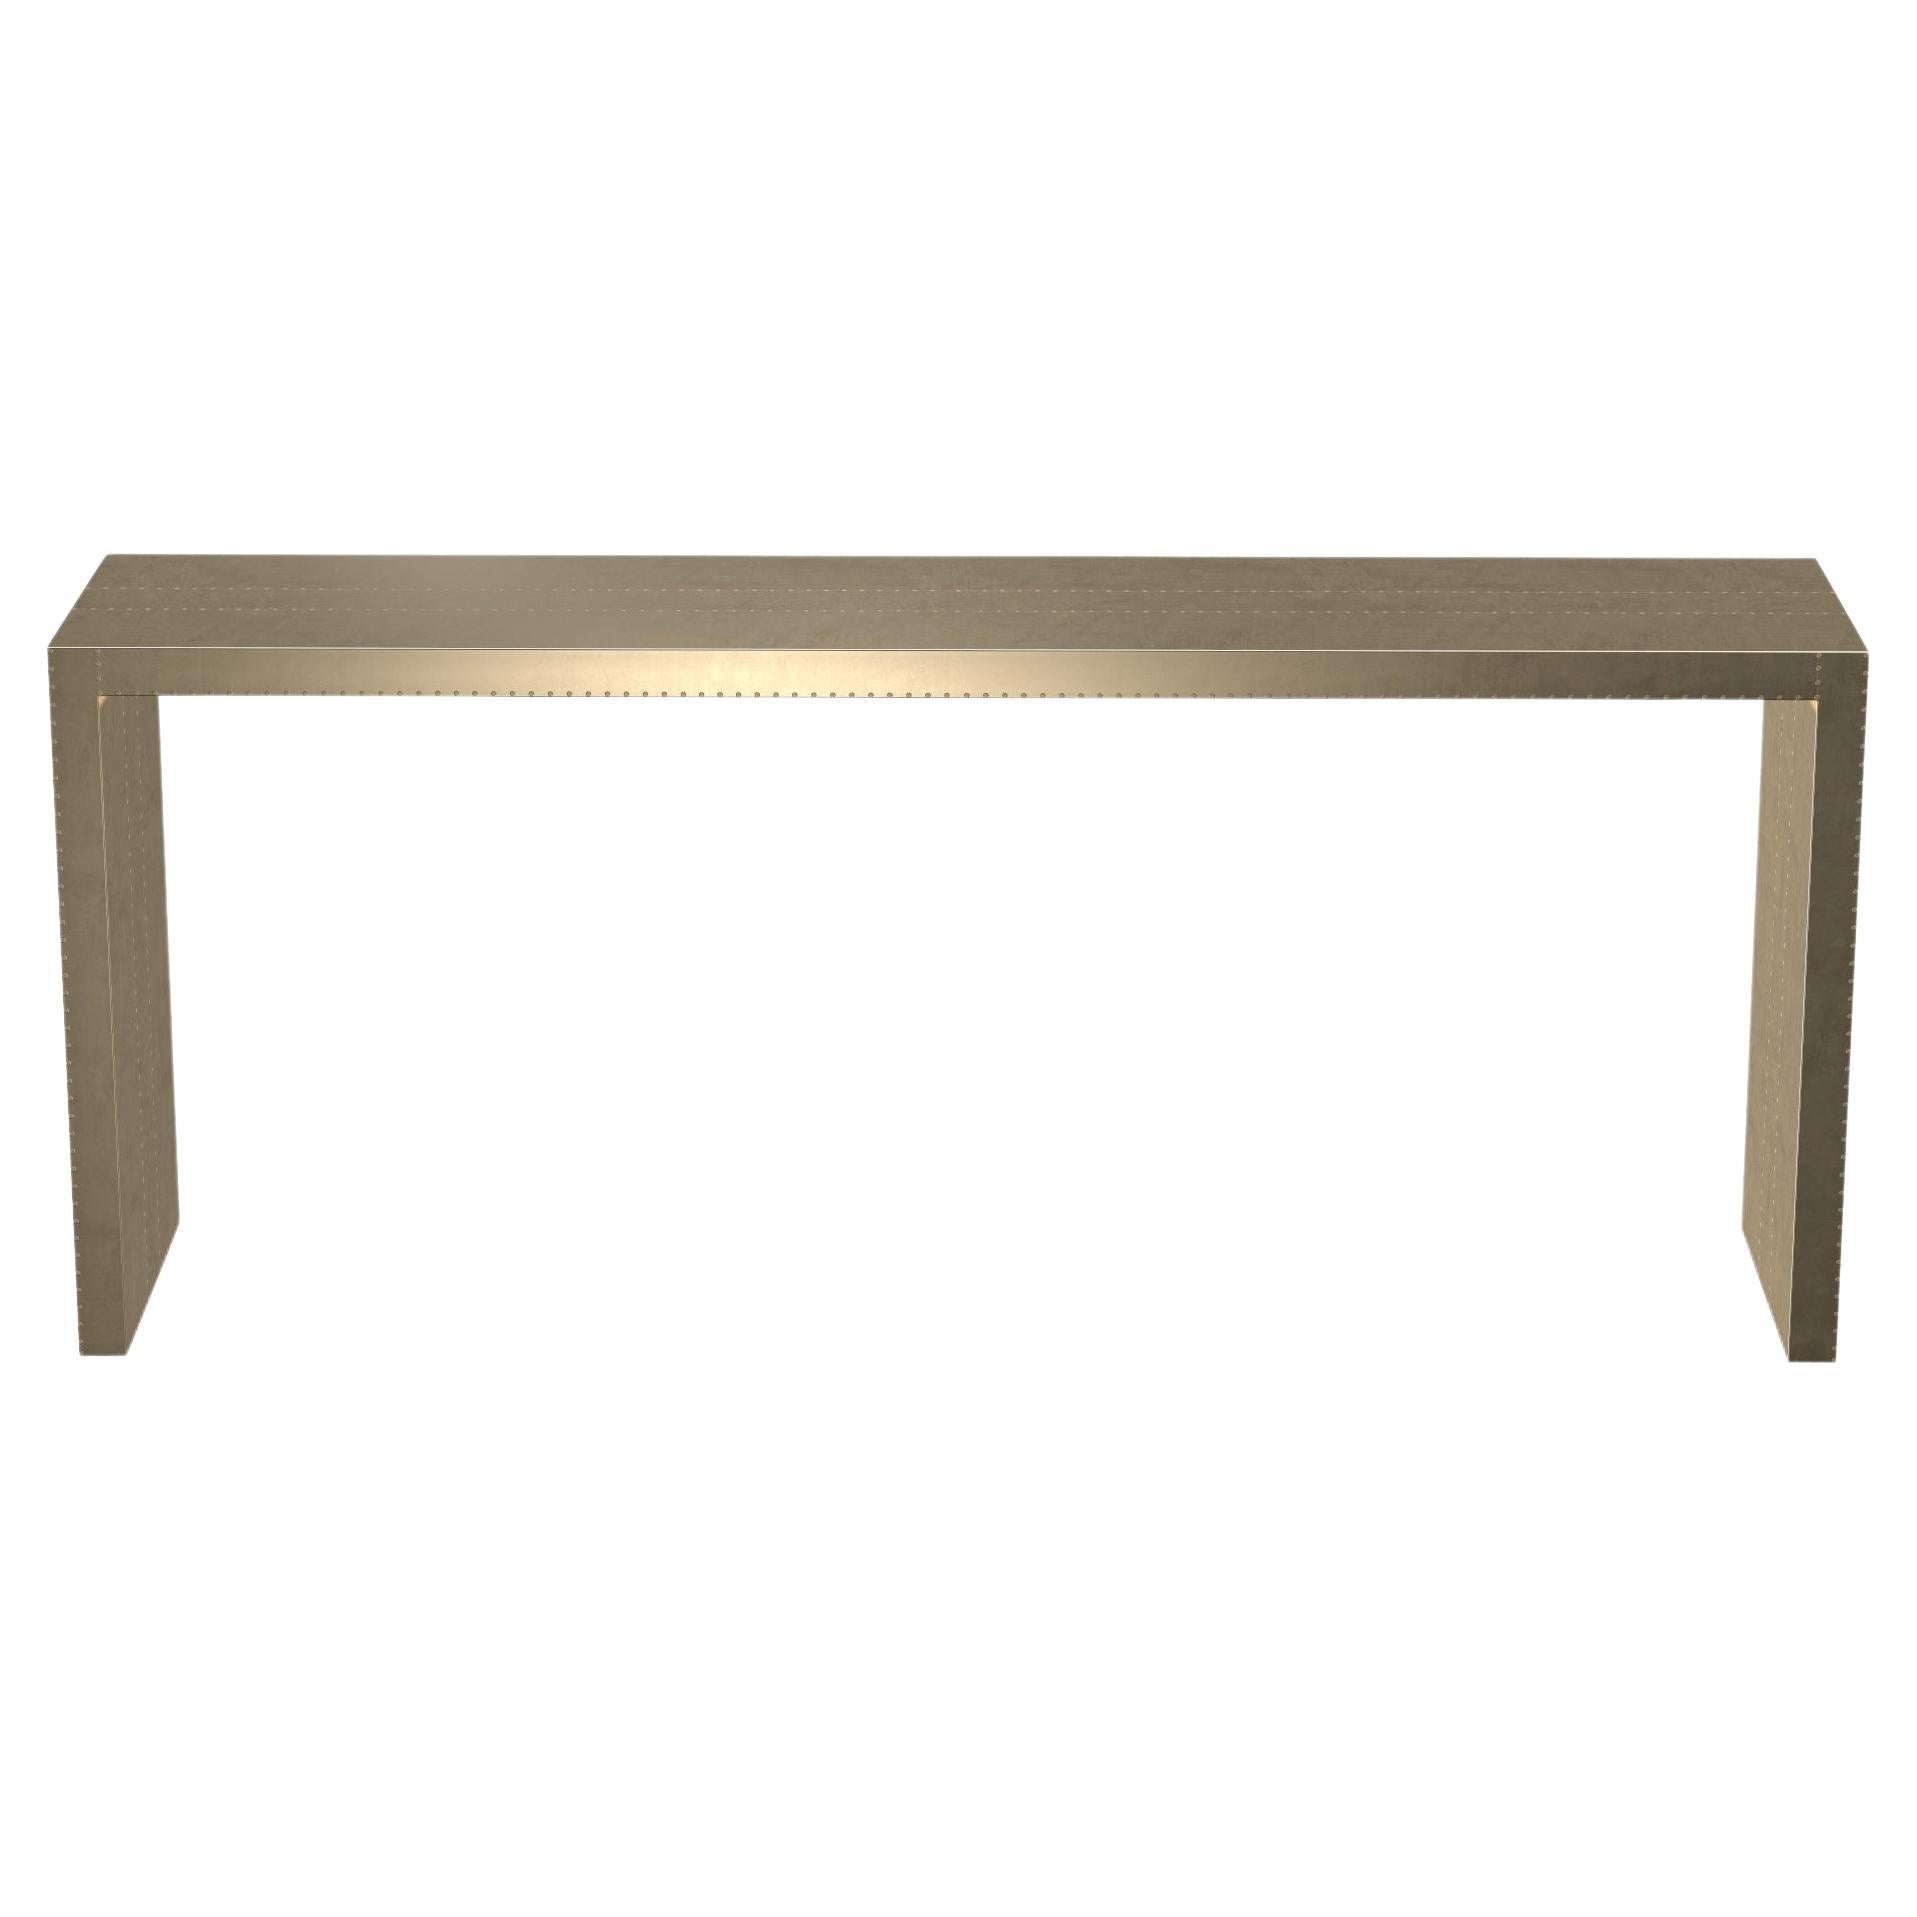 Art Deco Rectangular Console Tables Smooth Brass Bronze by Alison Spear For Sale